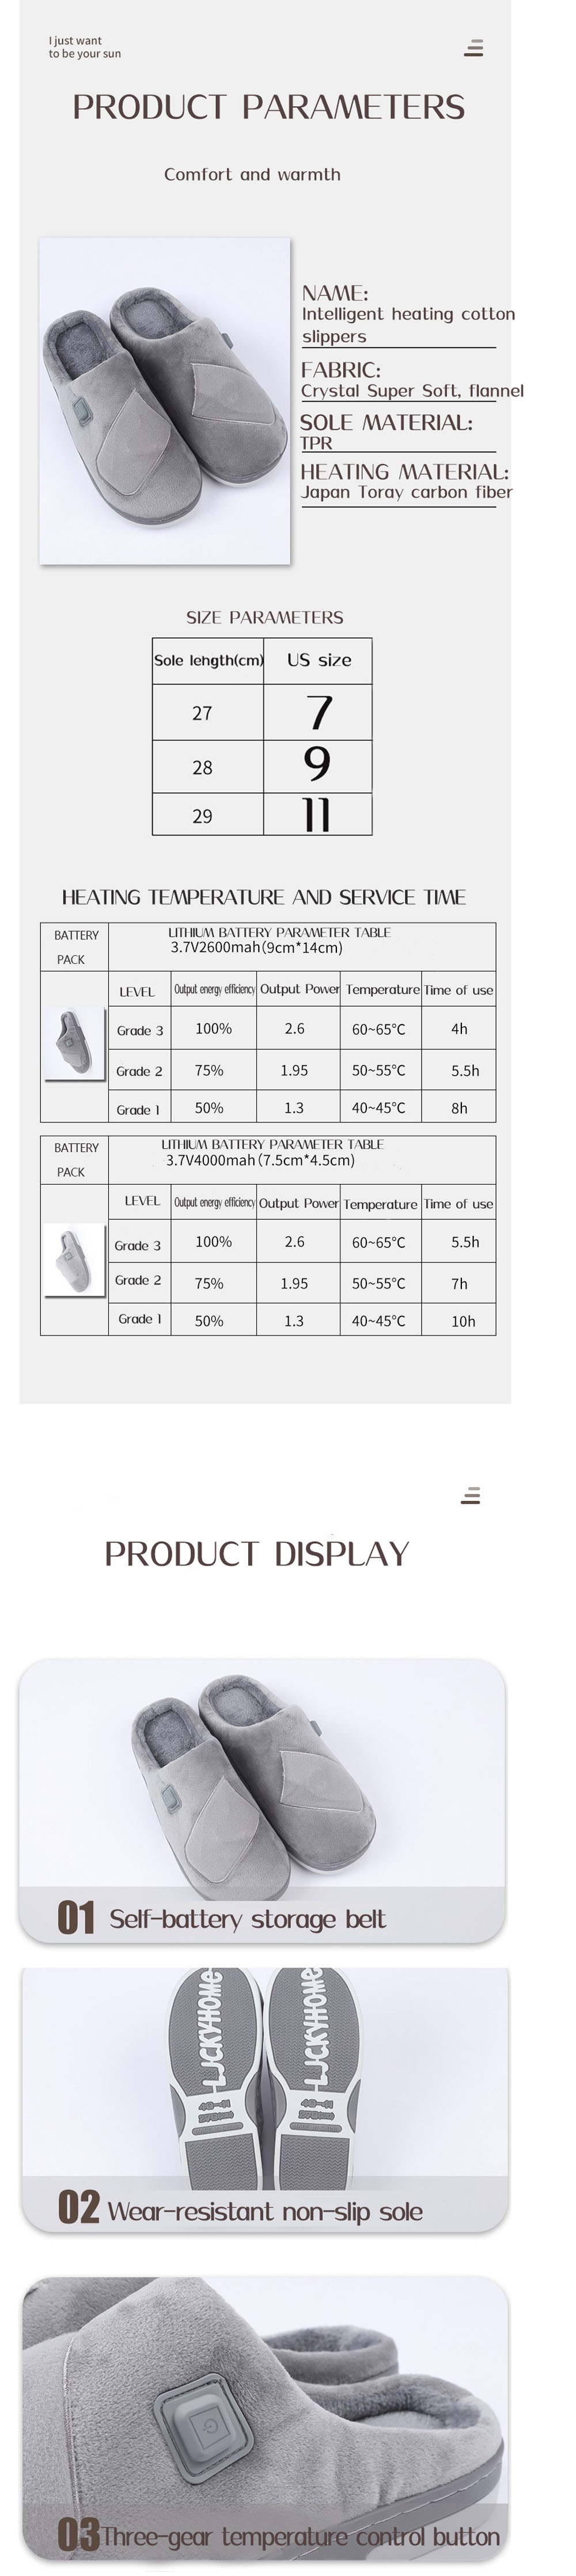 Heated Slippers Specification 5